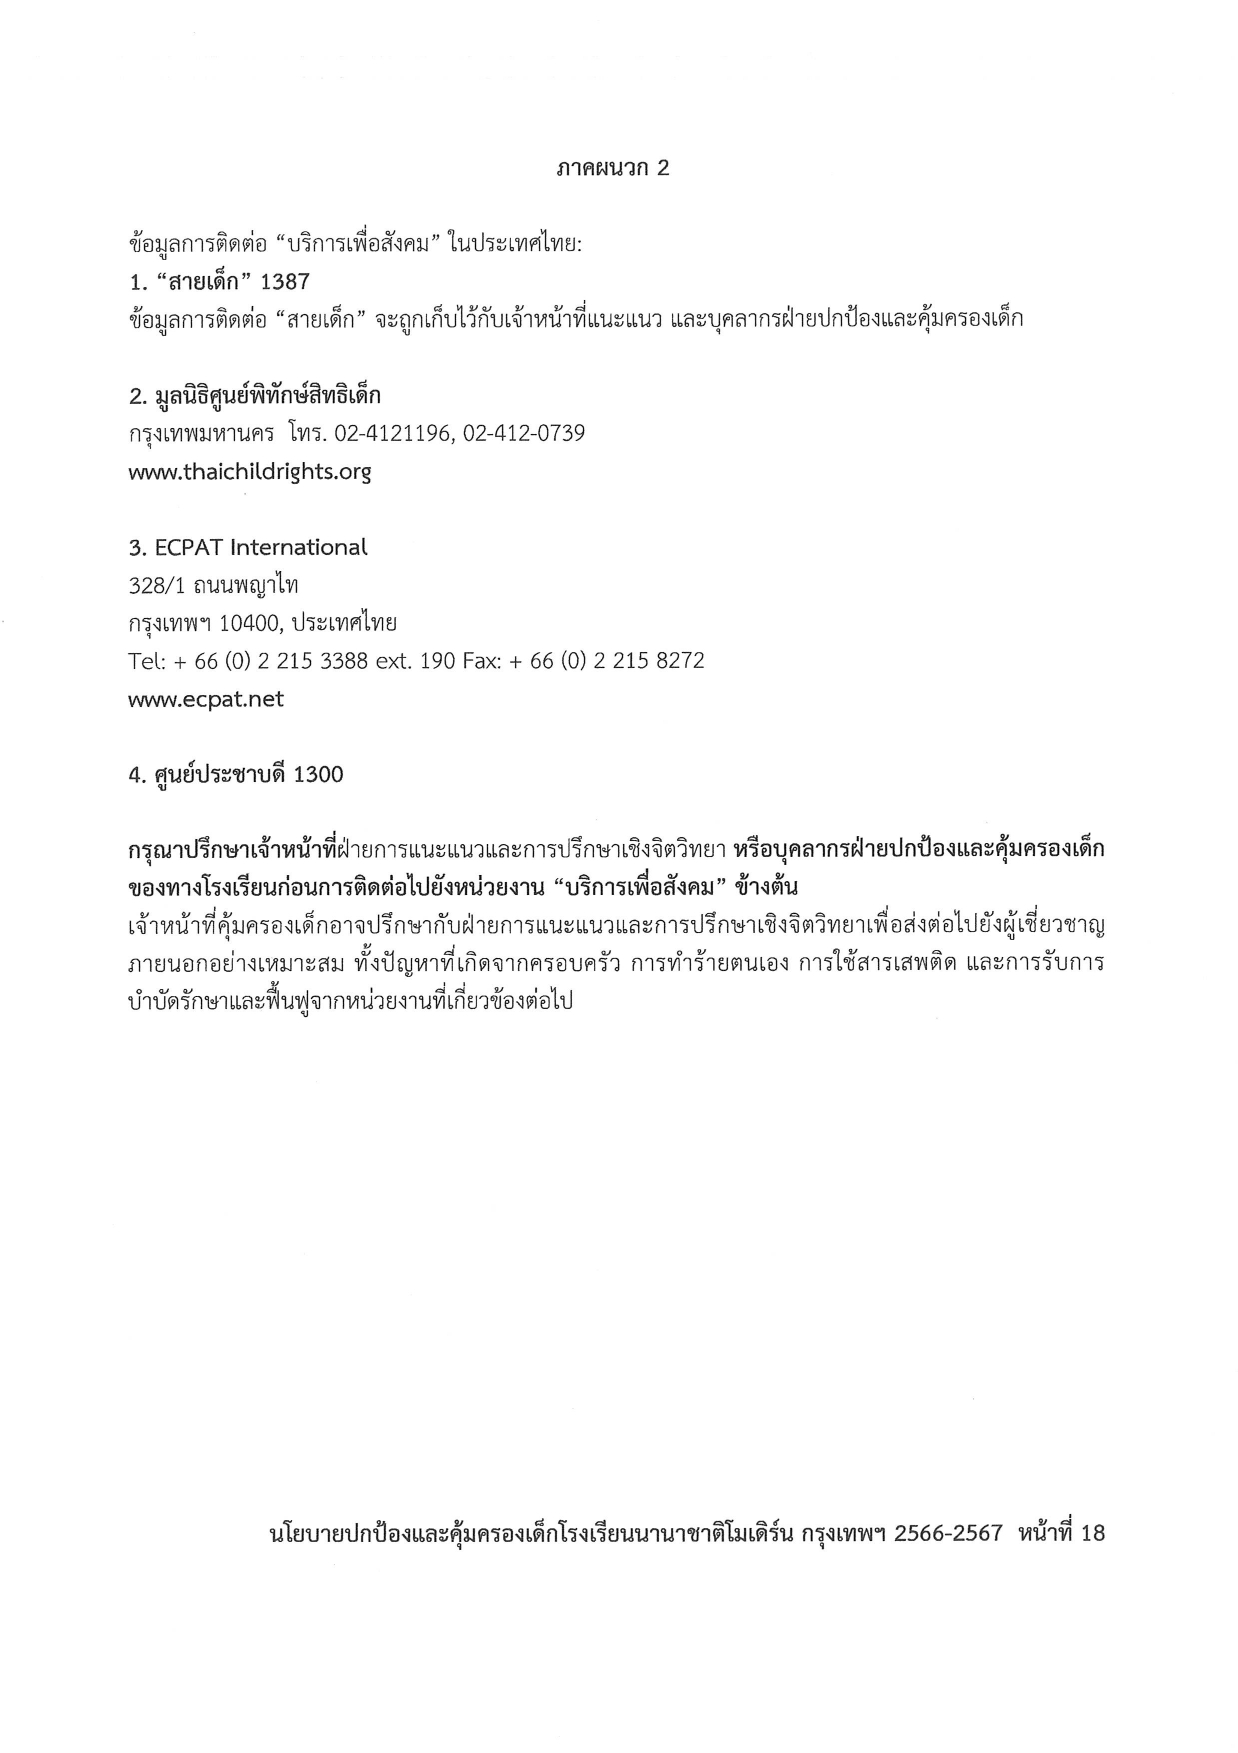 Child Protection Policy 2023 2024 Thai page 0018